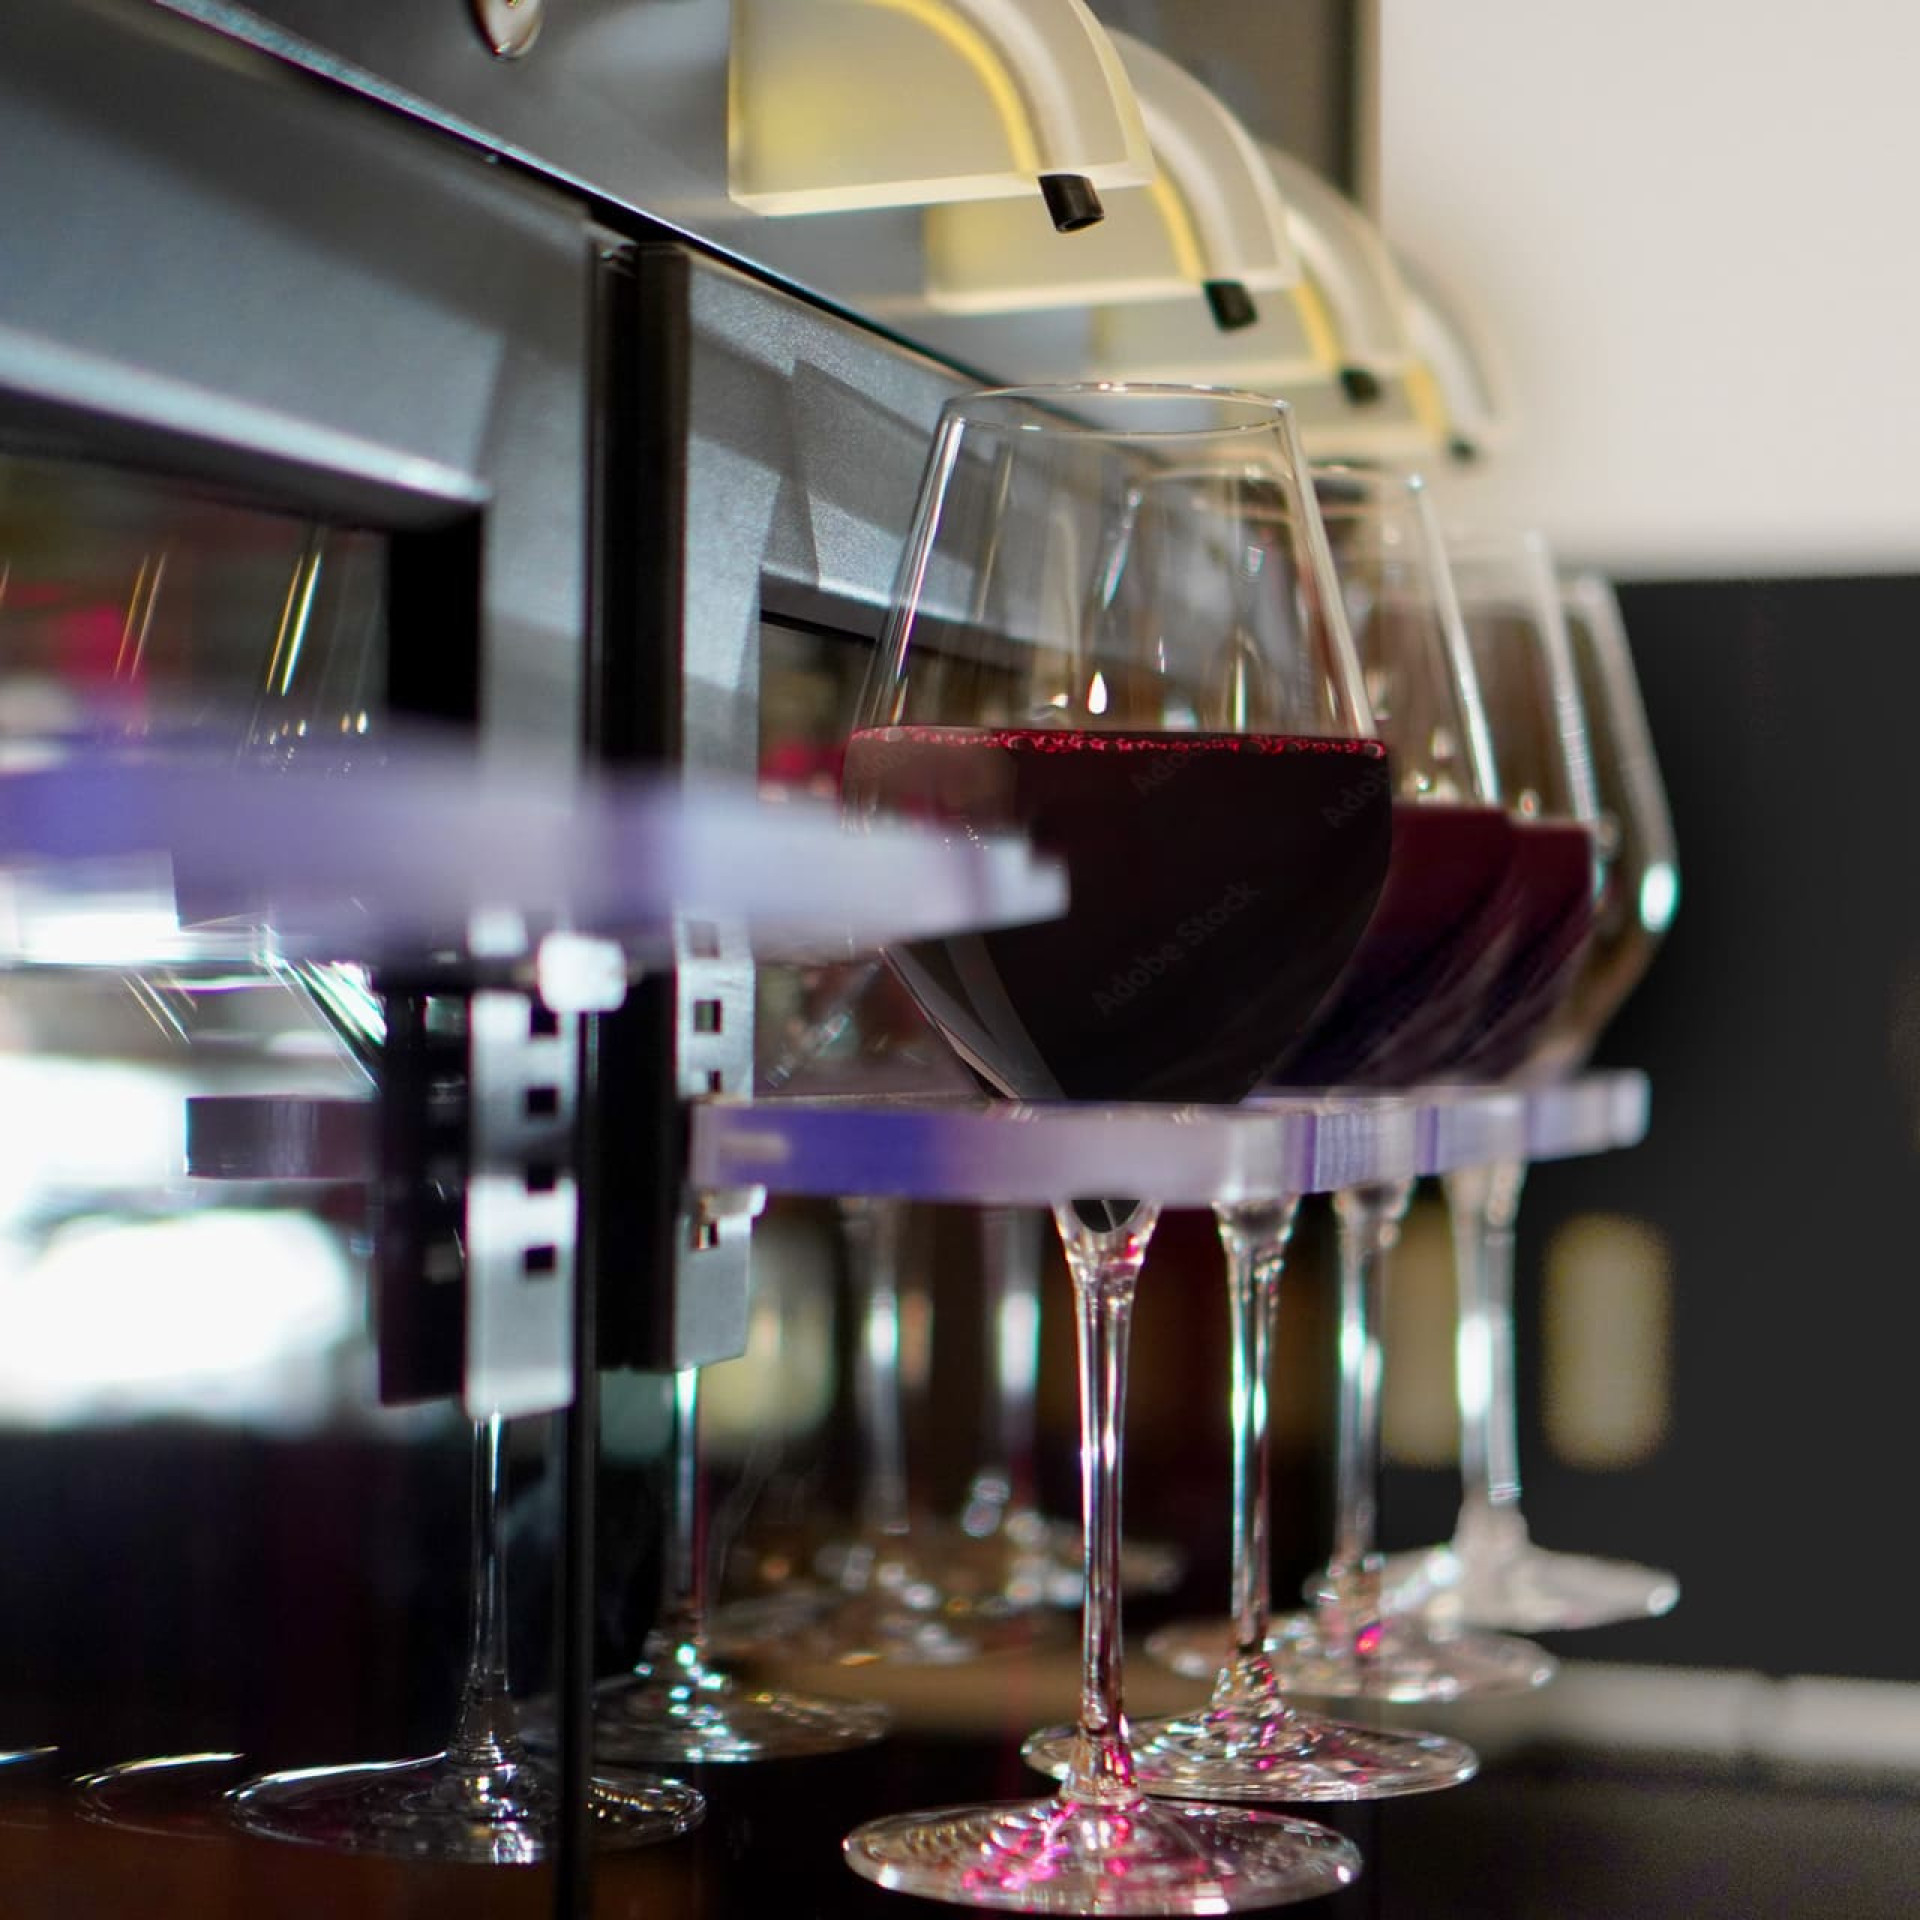 The wine service machine, an essential for establishments with large wine sales volumes.